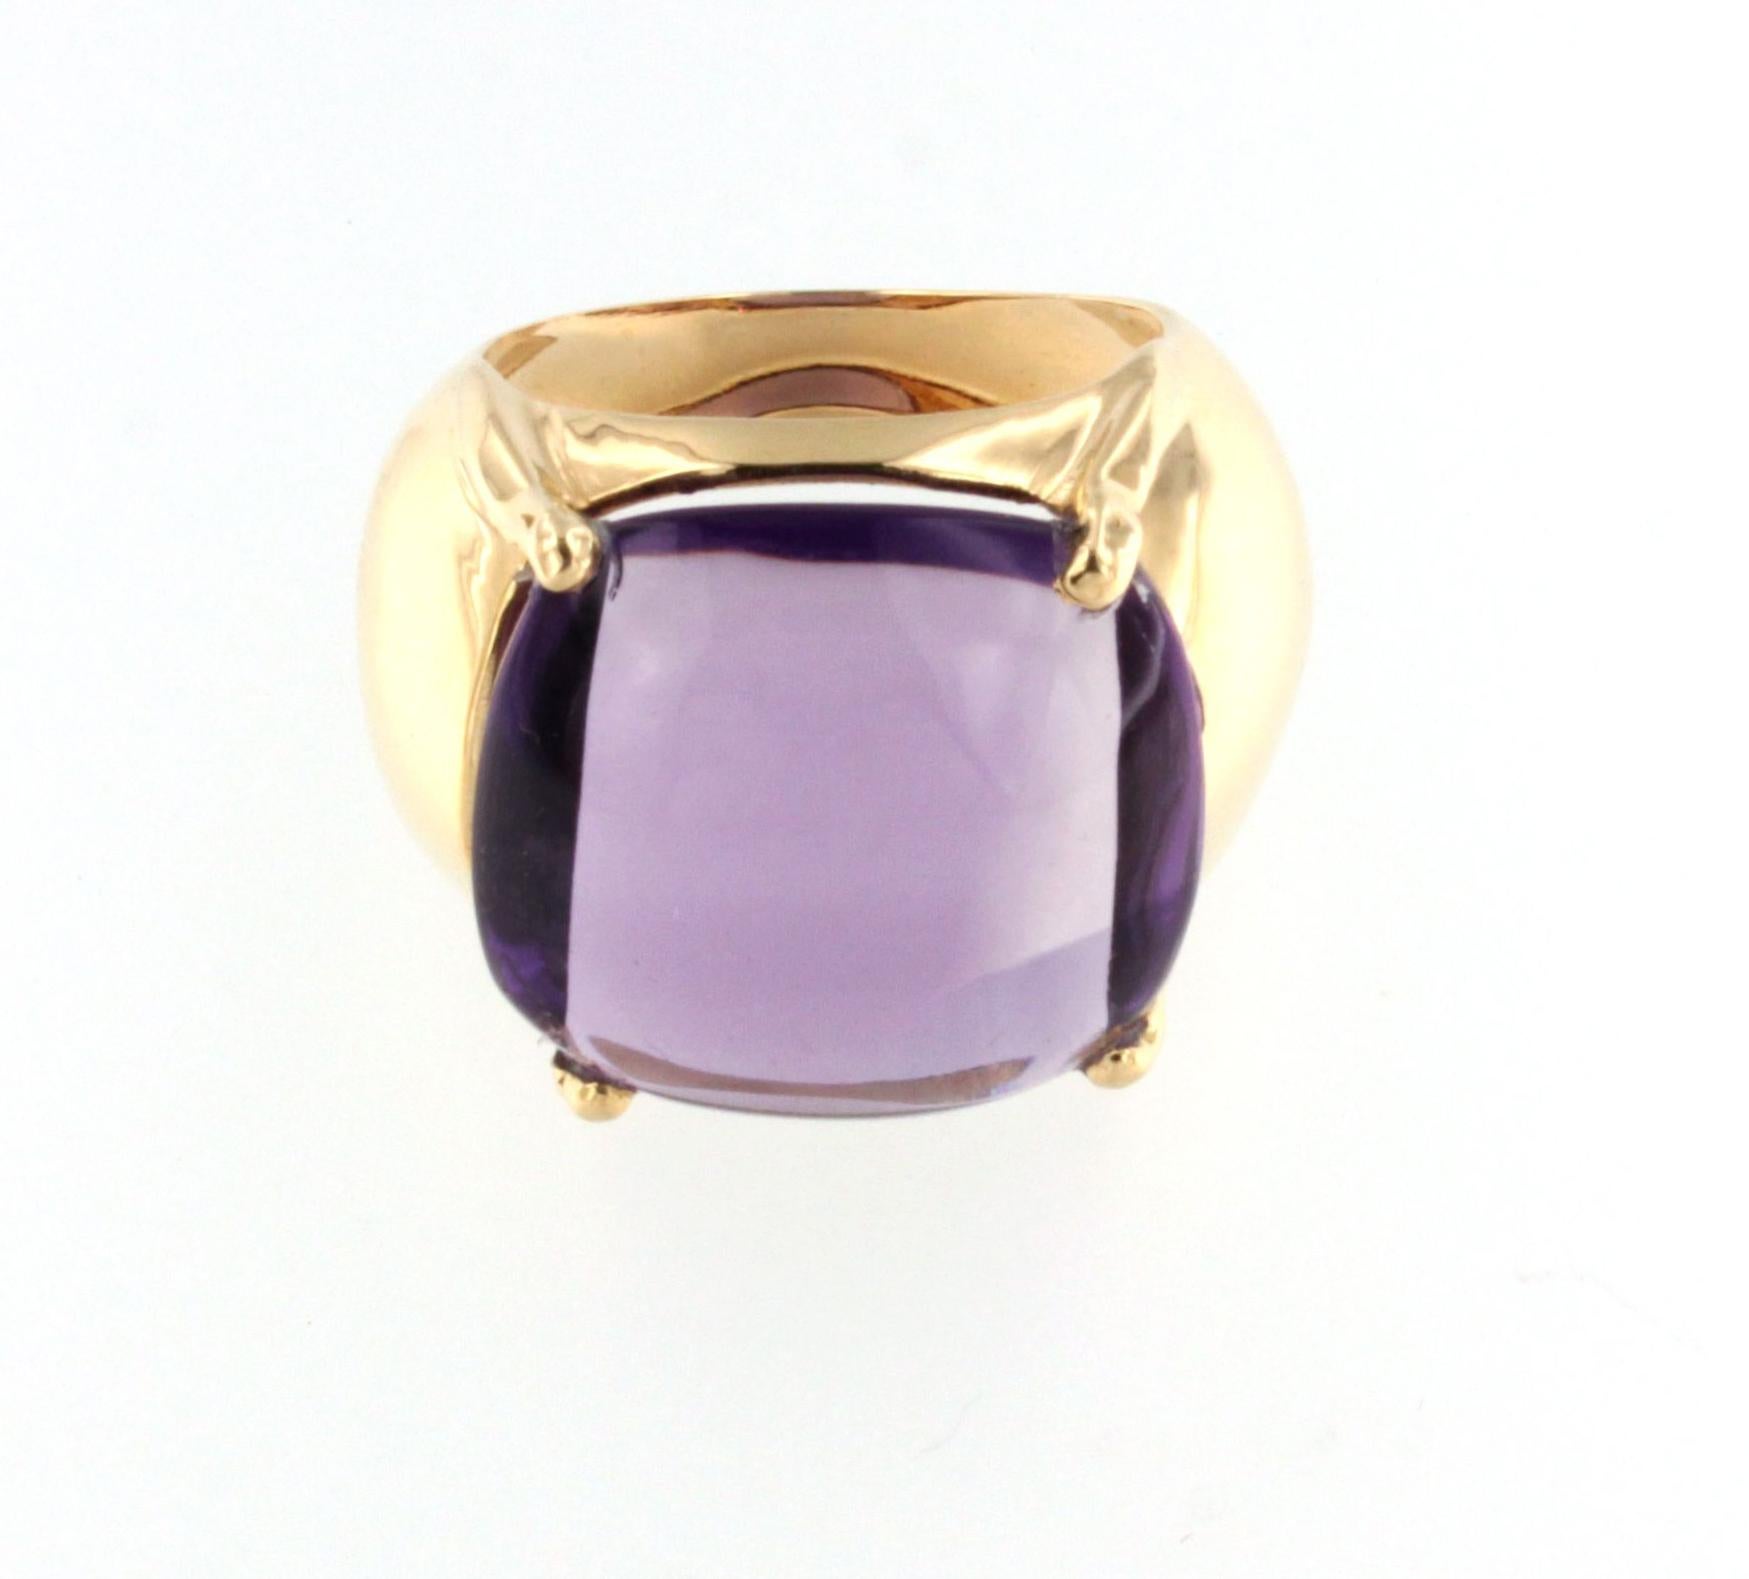 Fashion Ring in 18k rose gold with Amethyst handemade in Italy by Stanoppi Jewellery since 1948.
(square cabochon cut, size: mm)

Size of ring:  EU 14 / 54  - 7 USA   g.10,00

All Stanoppi Jewelry is new and has never been previously owned or worn.